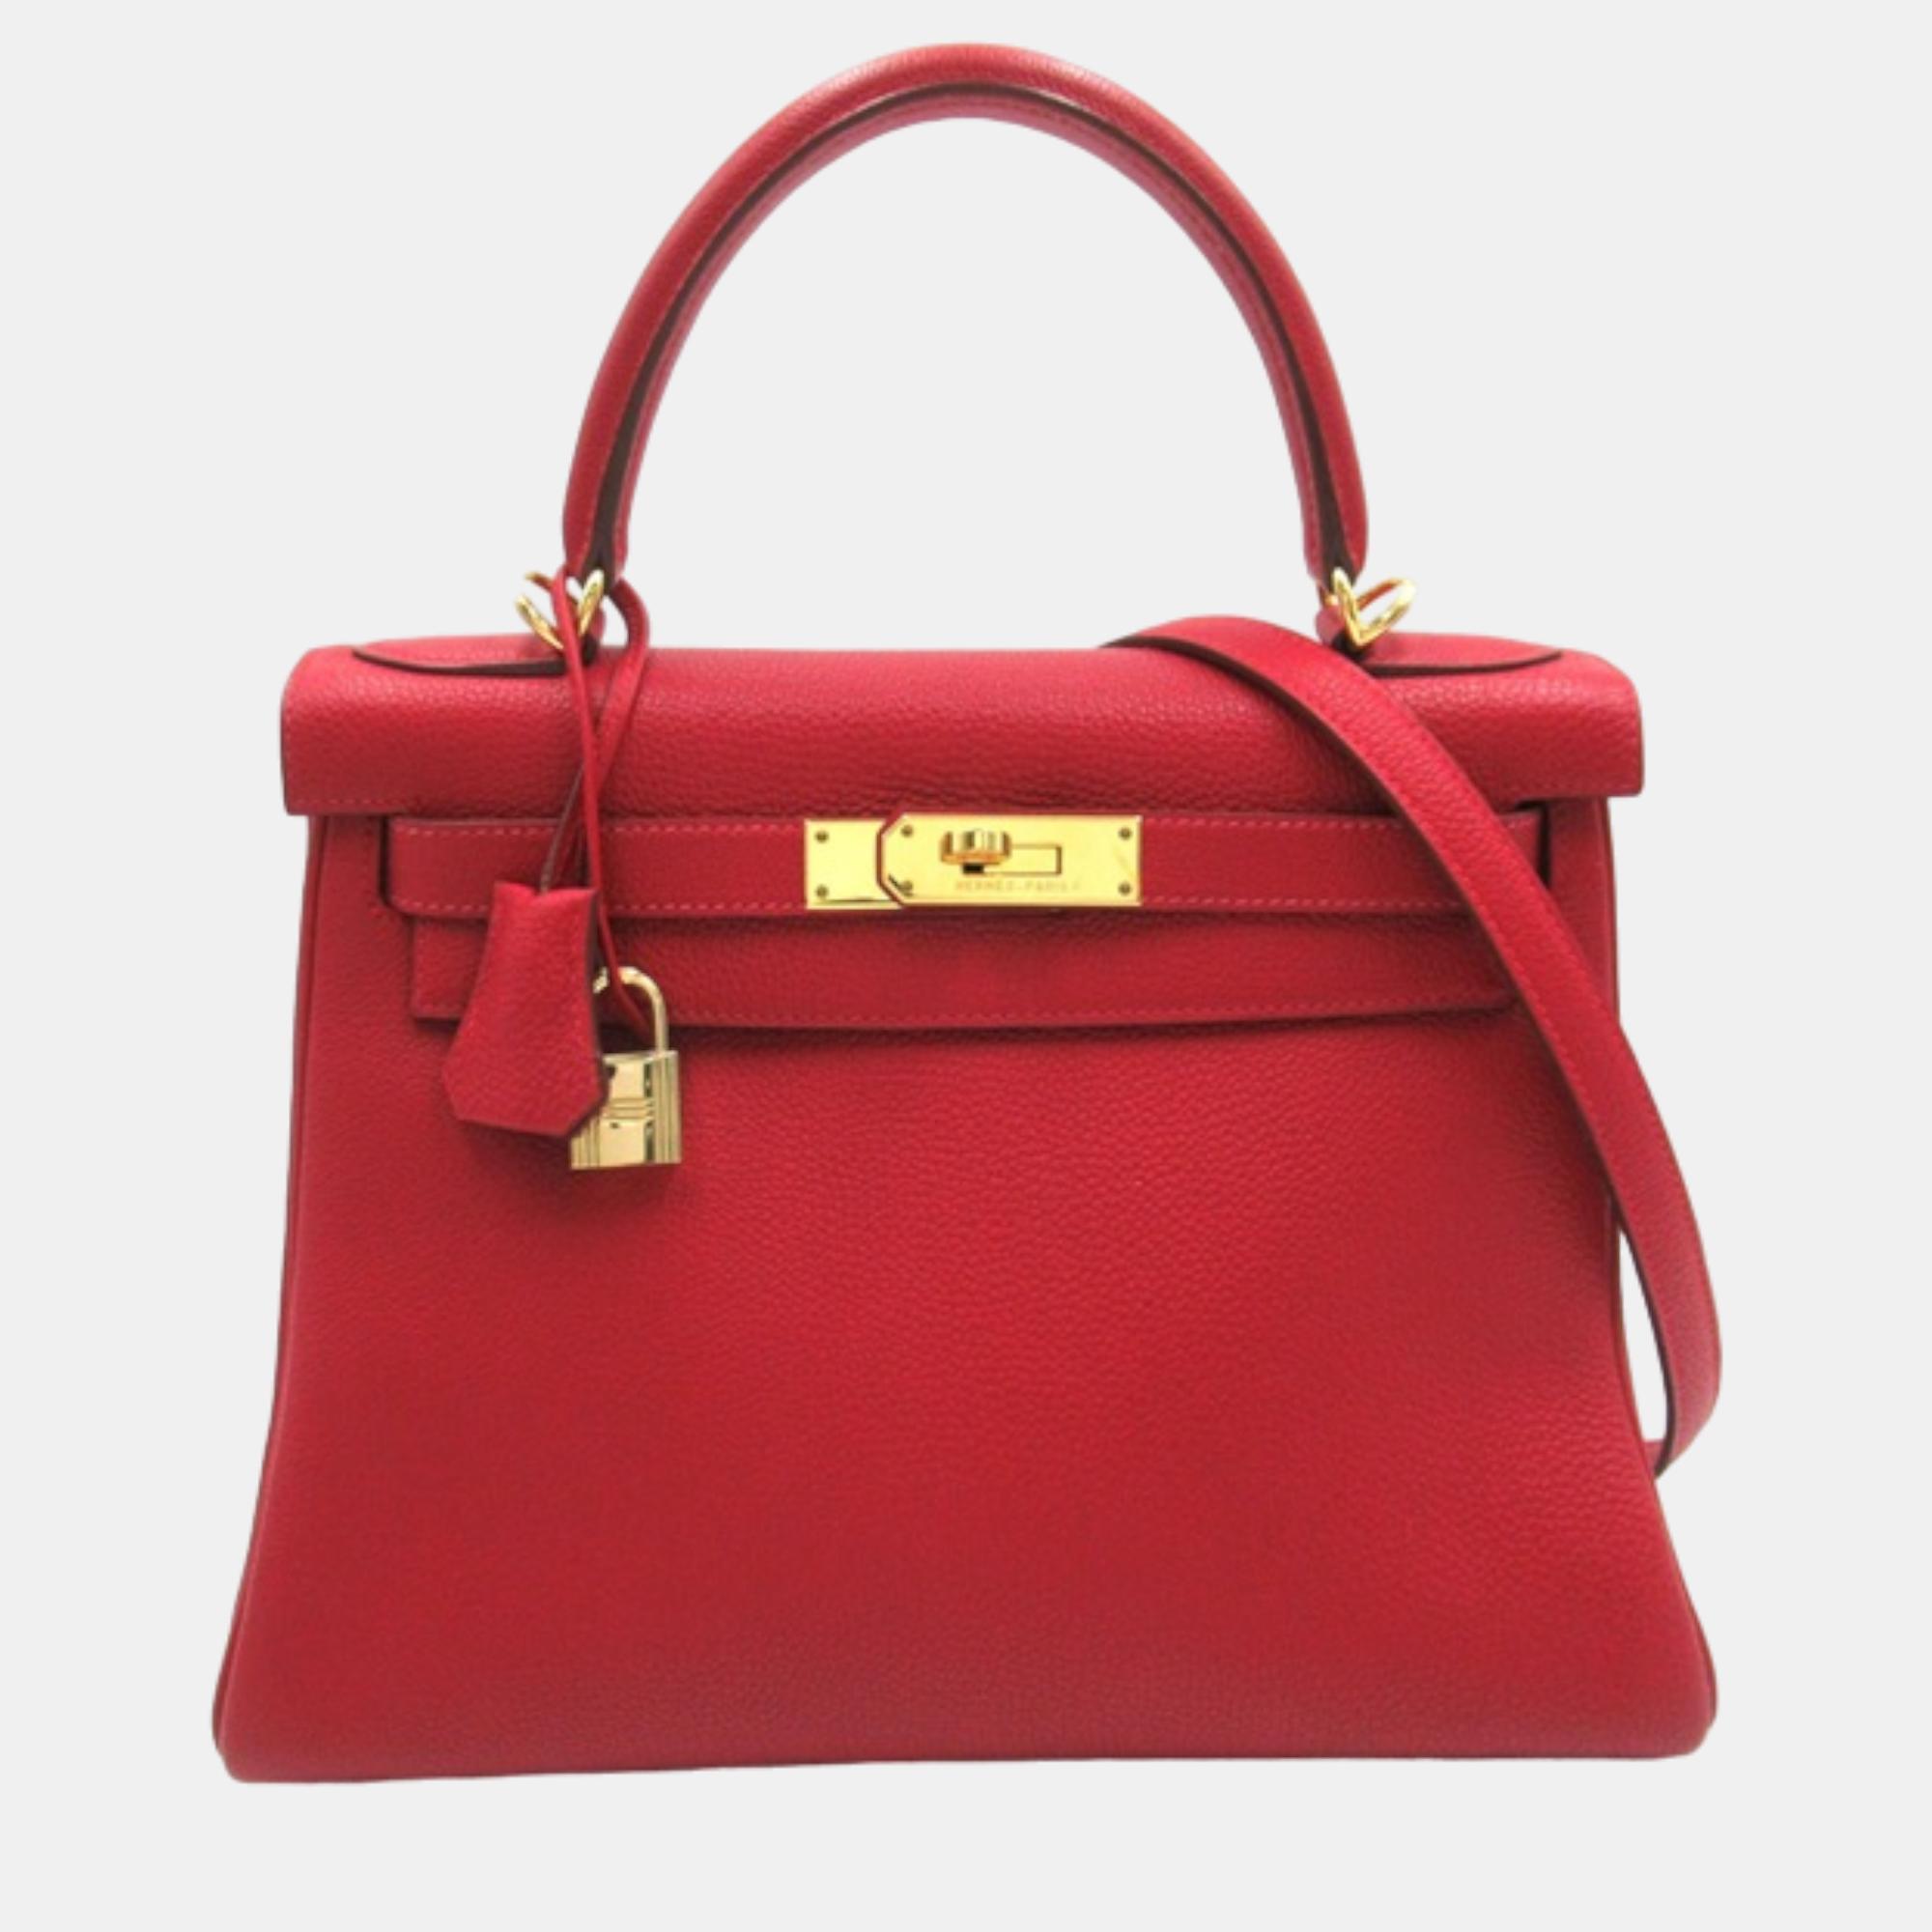 Pre-owned Hermes Red Leather Taurillon Clemence Kelly 28 Handbag